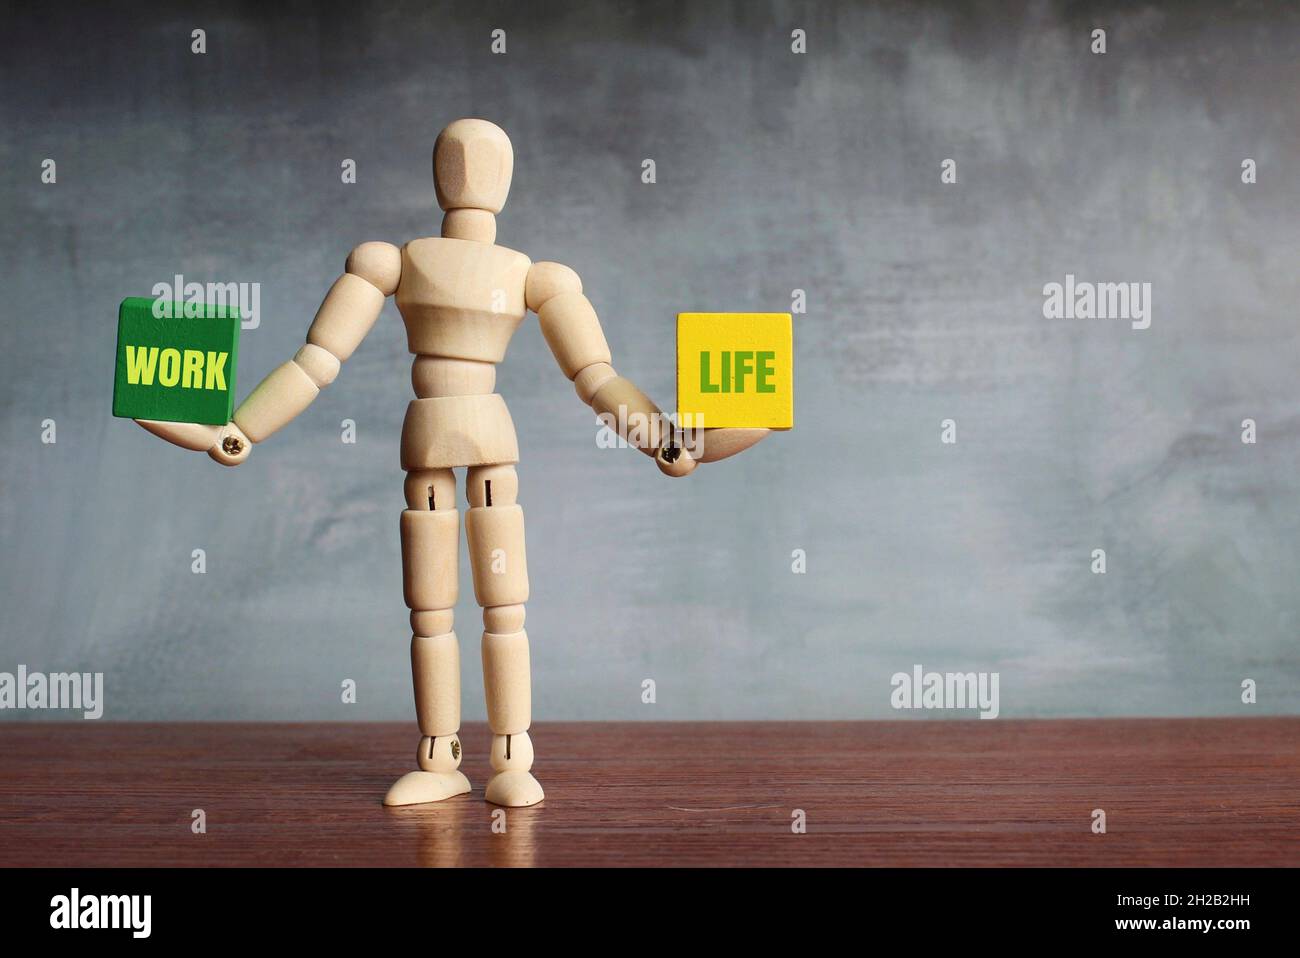 Work life balance concept. Wooden human figure balancing two wooden blocks with text WORK and LIFE Stock Photo